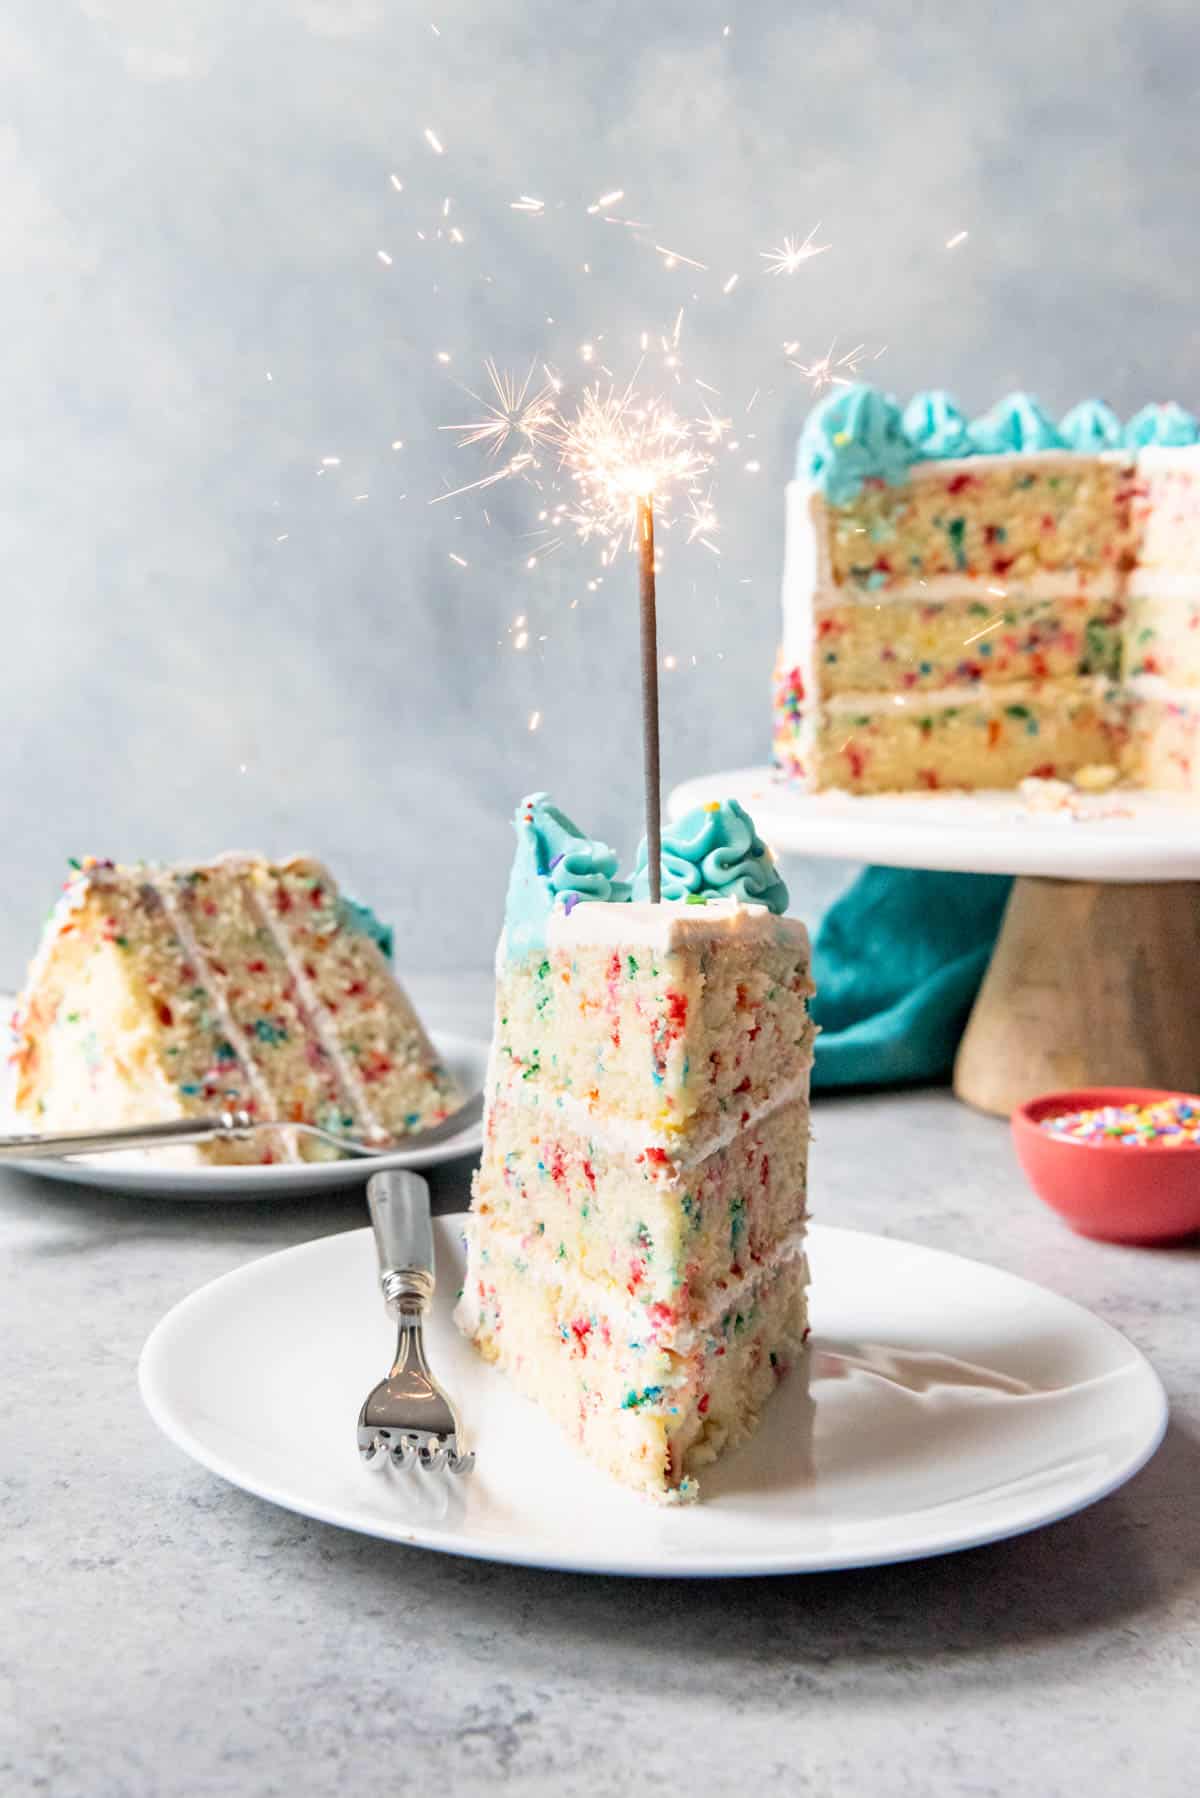 An image of a slice of birthday cake with a sparkler in it.